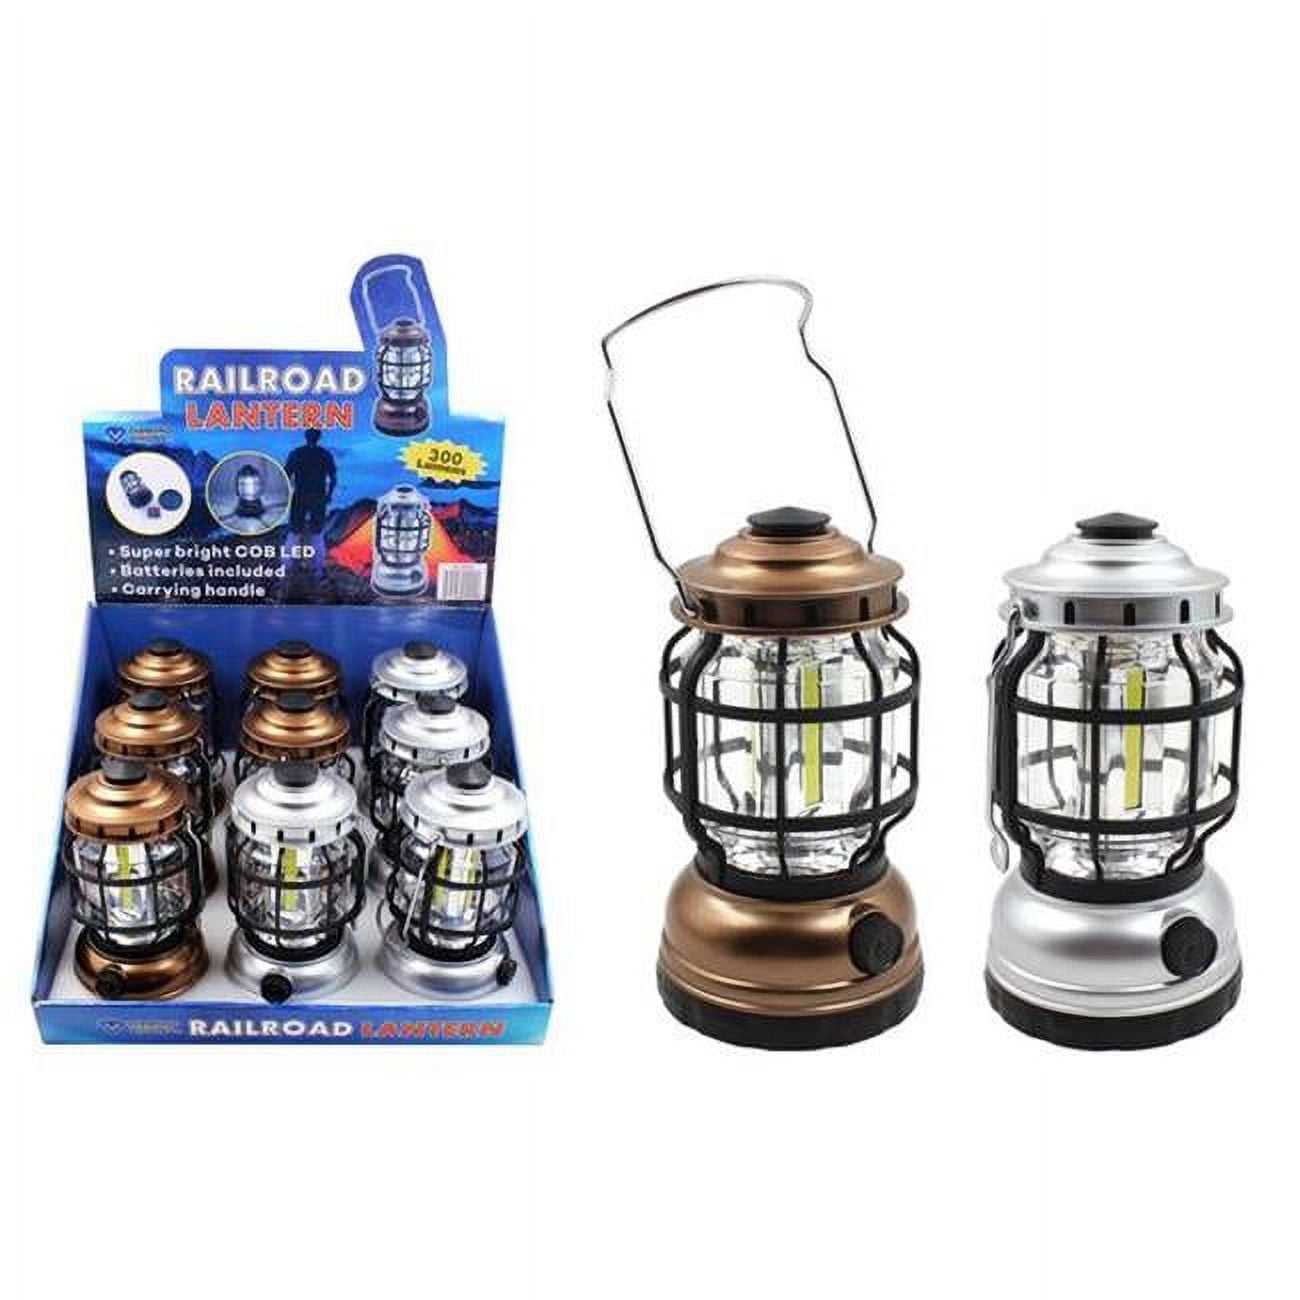 Picture of Diamond Visions 9068395 300 Lumens Assorted LED Railroad Lantern - Pack of 9